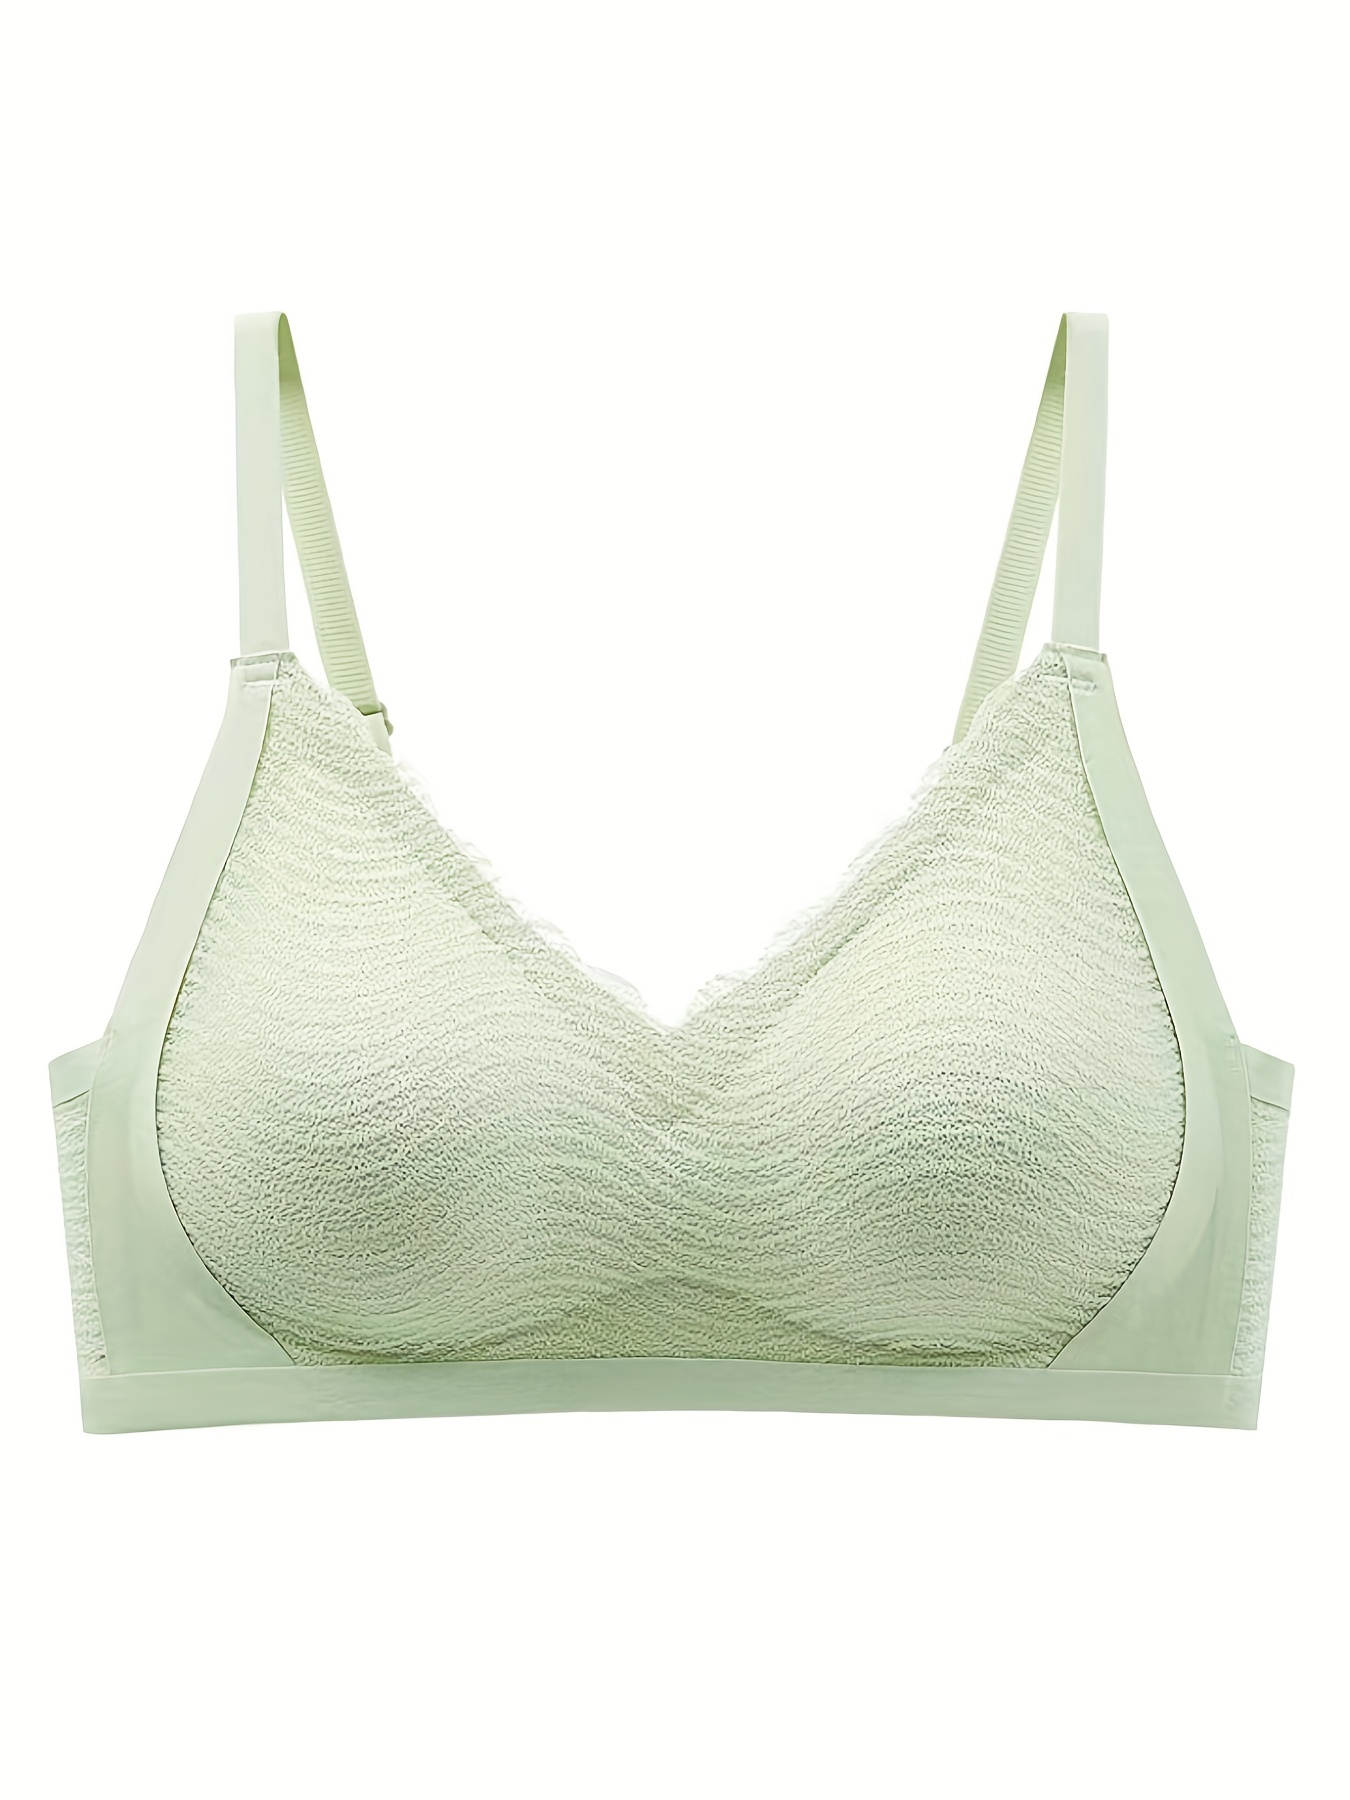 Cotton Bras For Women Lingerie Wirefree Lace Underwear Padded